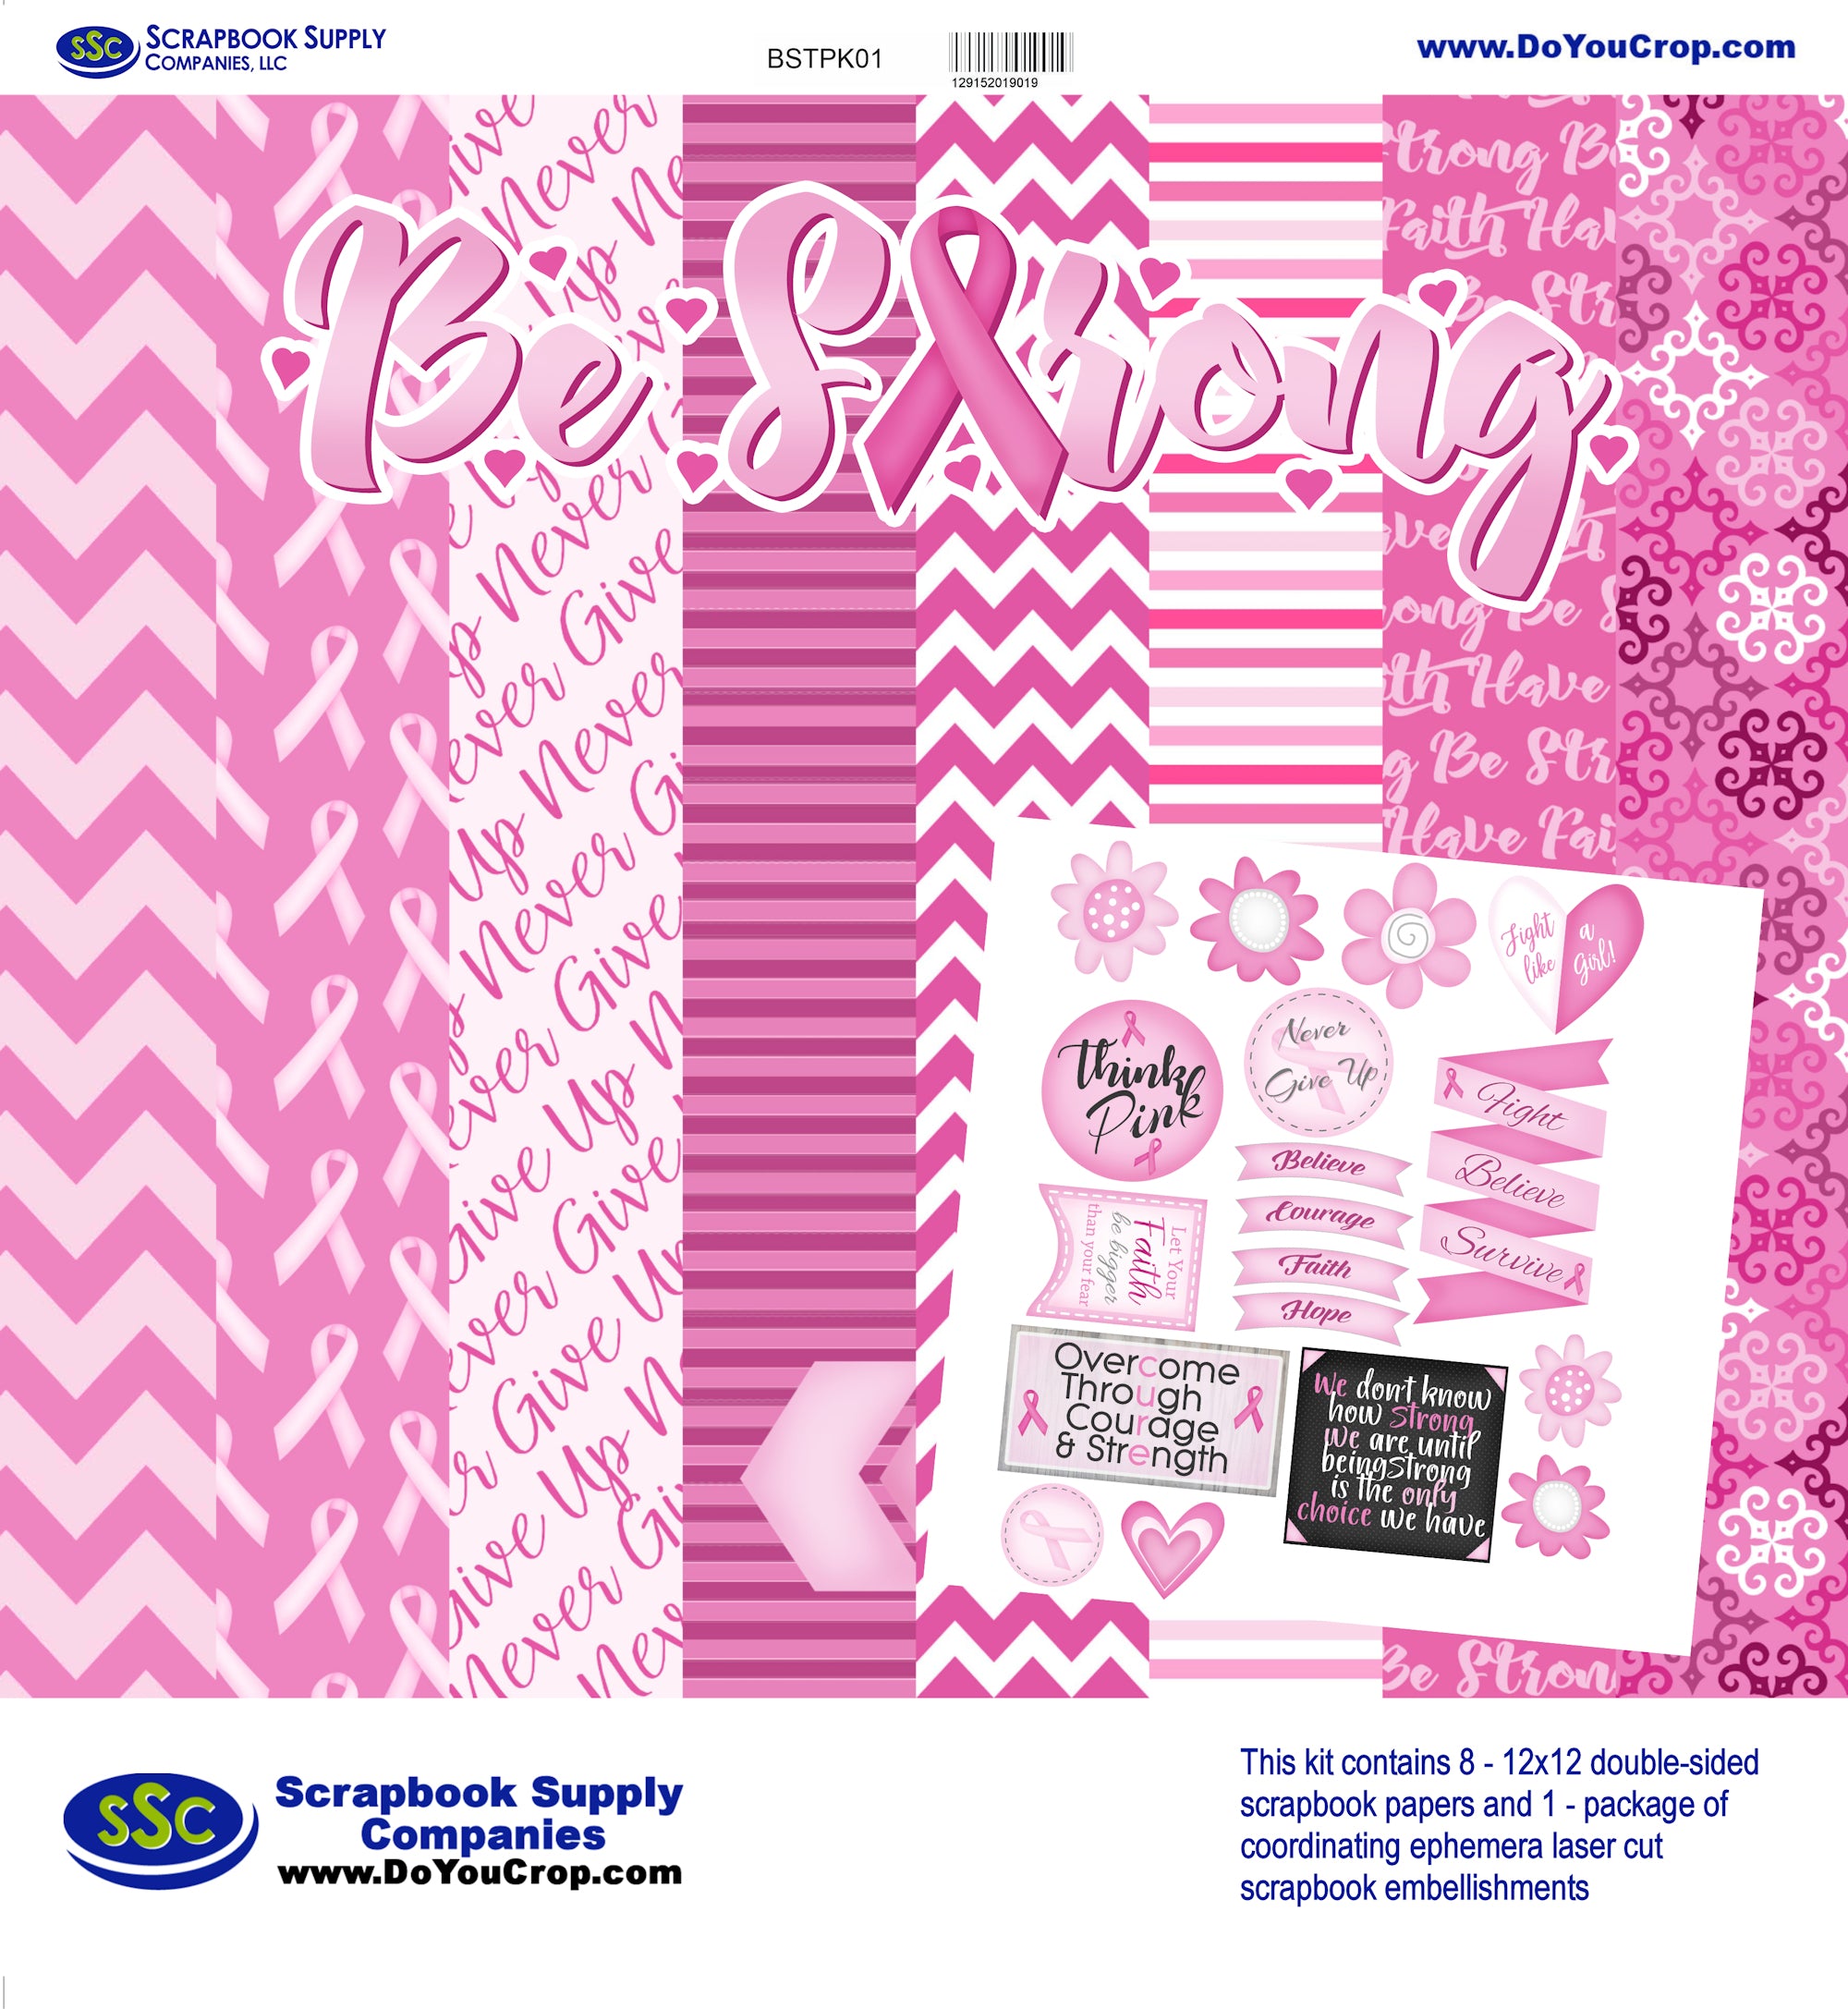 Be Strong 12 x 12 Scrapbook Paper & Embellishment Kit by SSC Designs